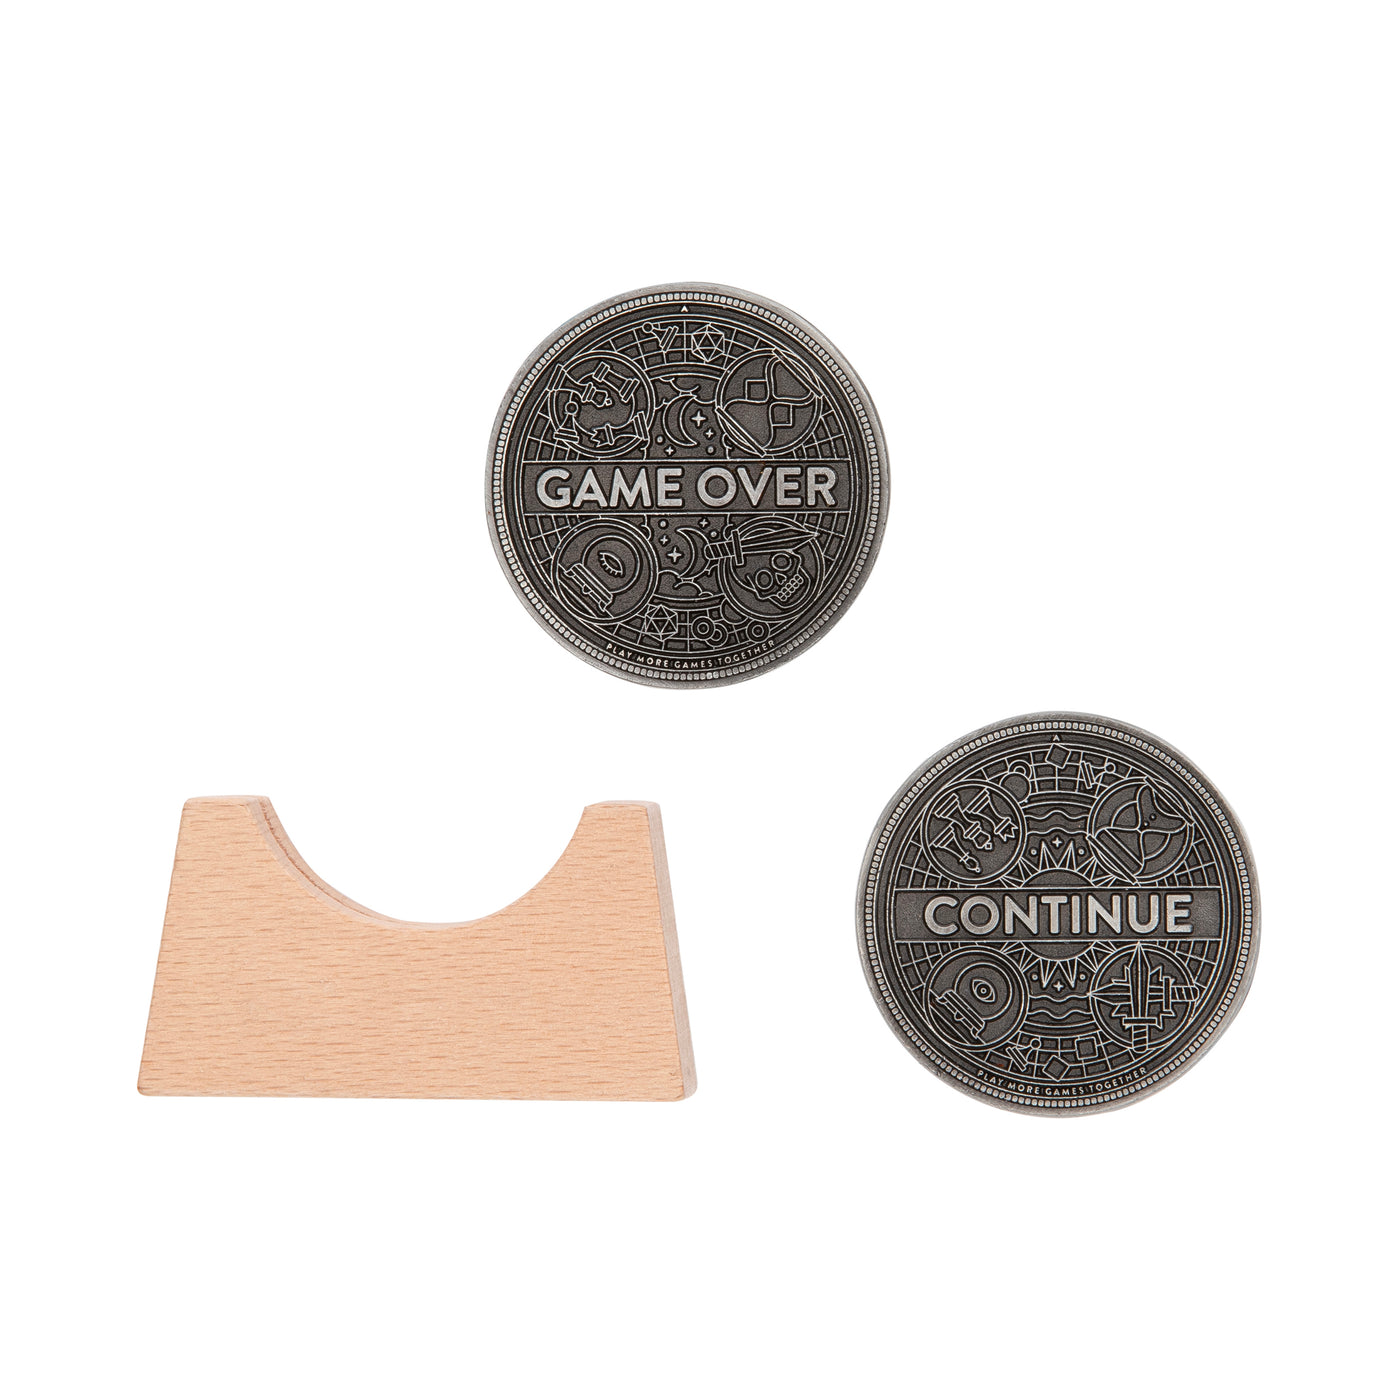 A coin showing "Game Over", "Continue" and a display stand